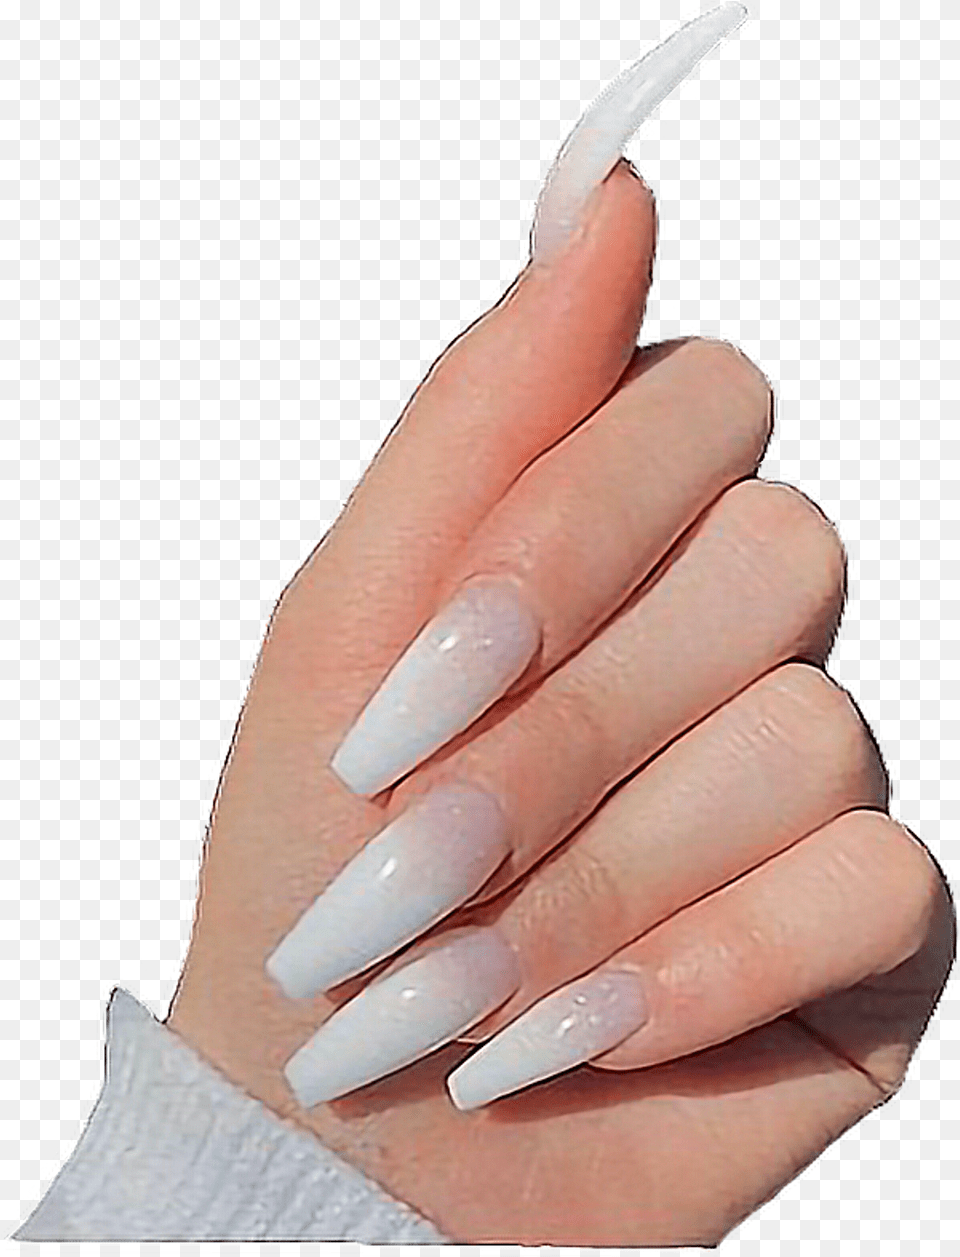 Grey And White Acrylic Nails Nail Transparent Background, Body Part, Hand, Manicure, Person Png